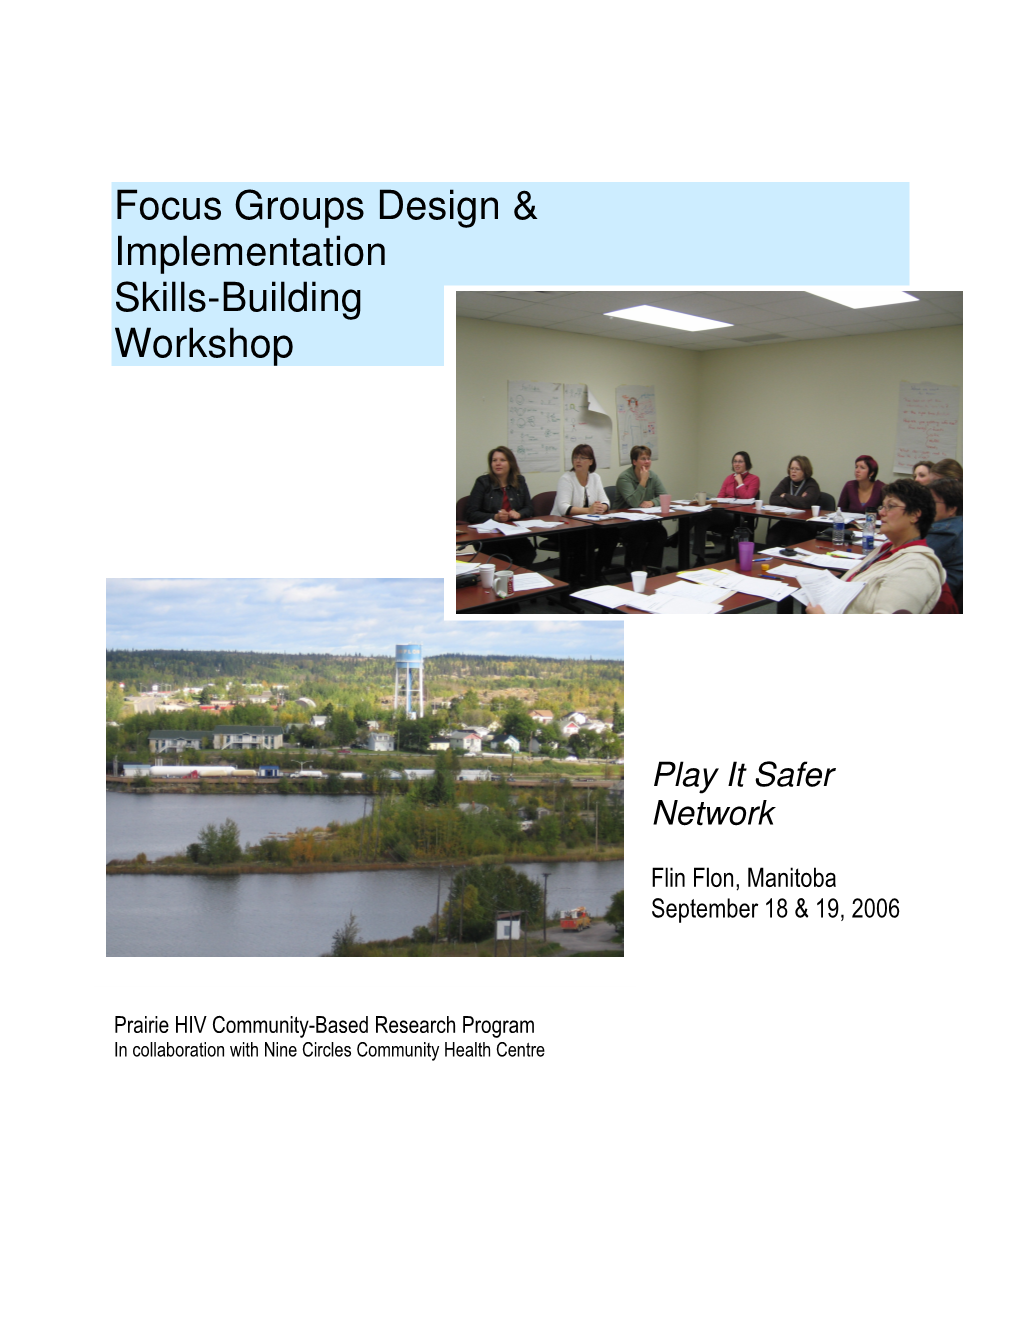 Focus Groups Training in the North Report